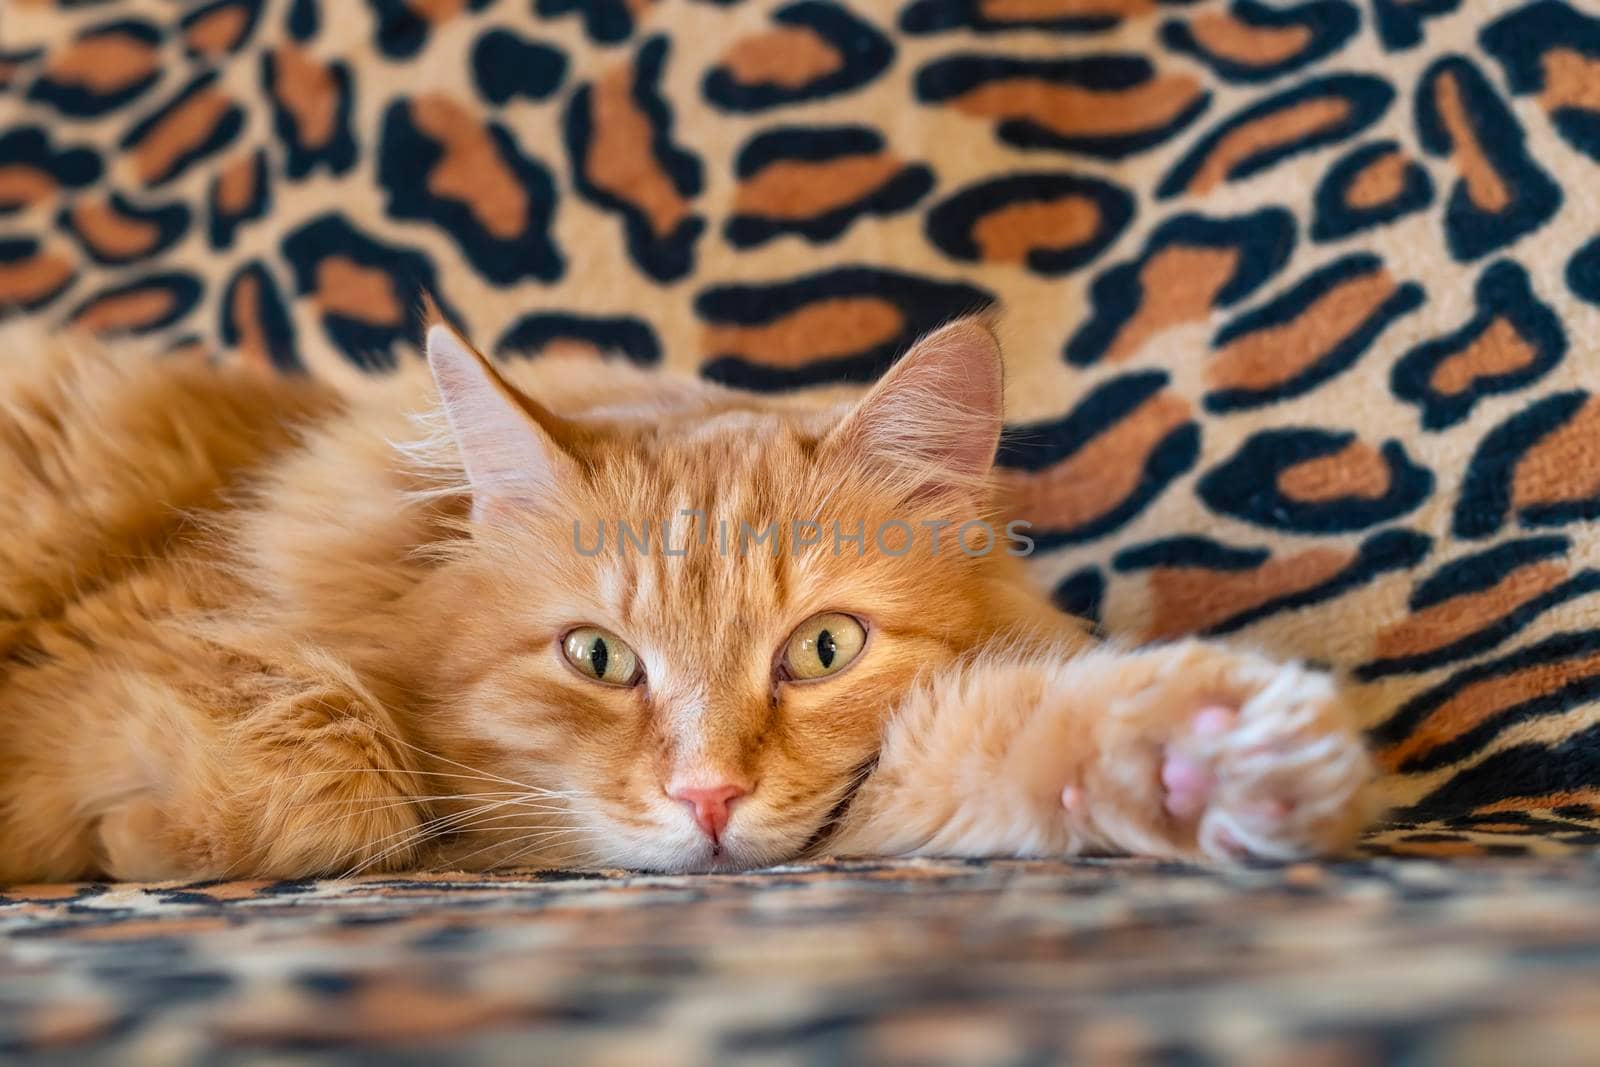 relaxed red cat lies on the couch and watches what is happening in the room by jk3030